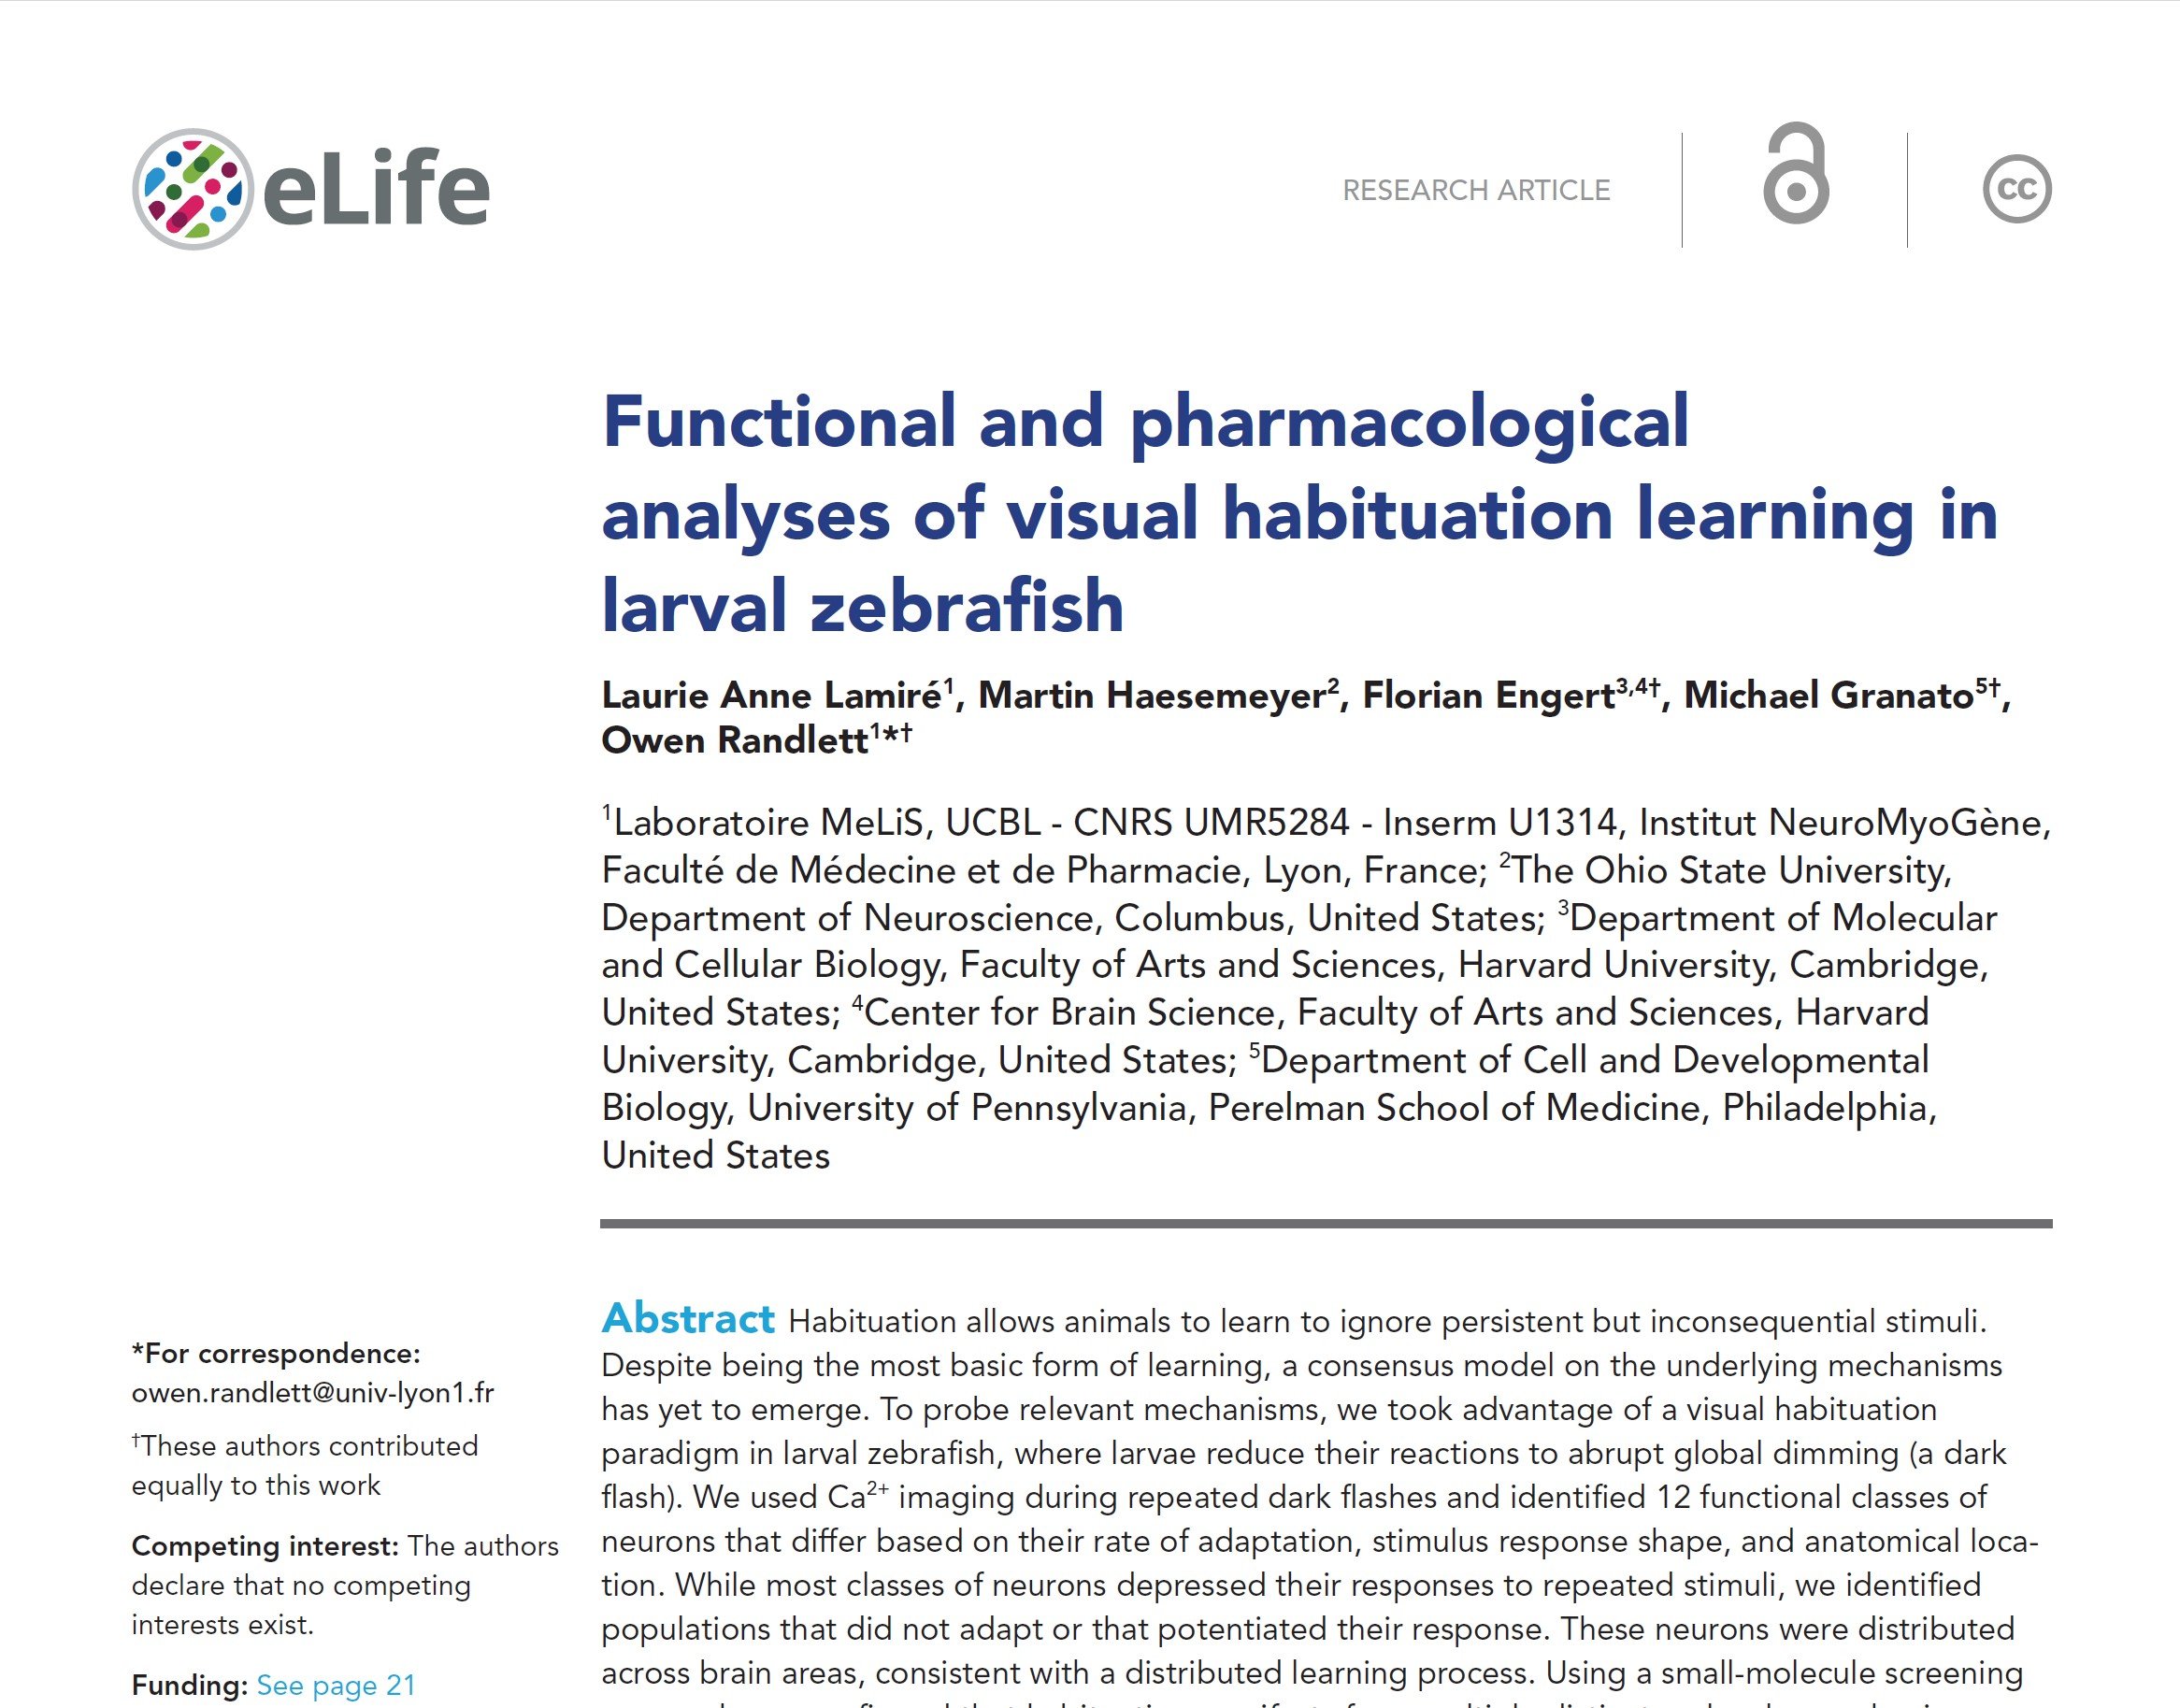 Laurie Anne’s habituation screen paper published in eLife